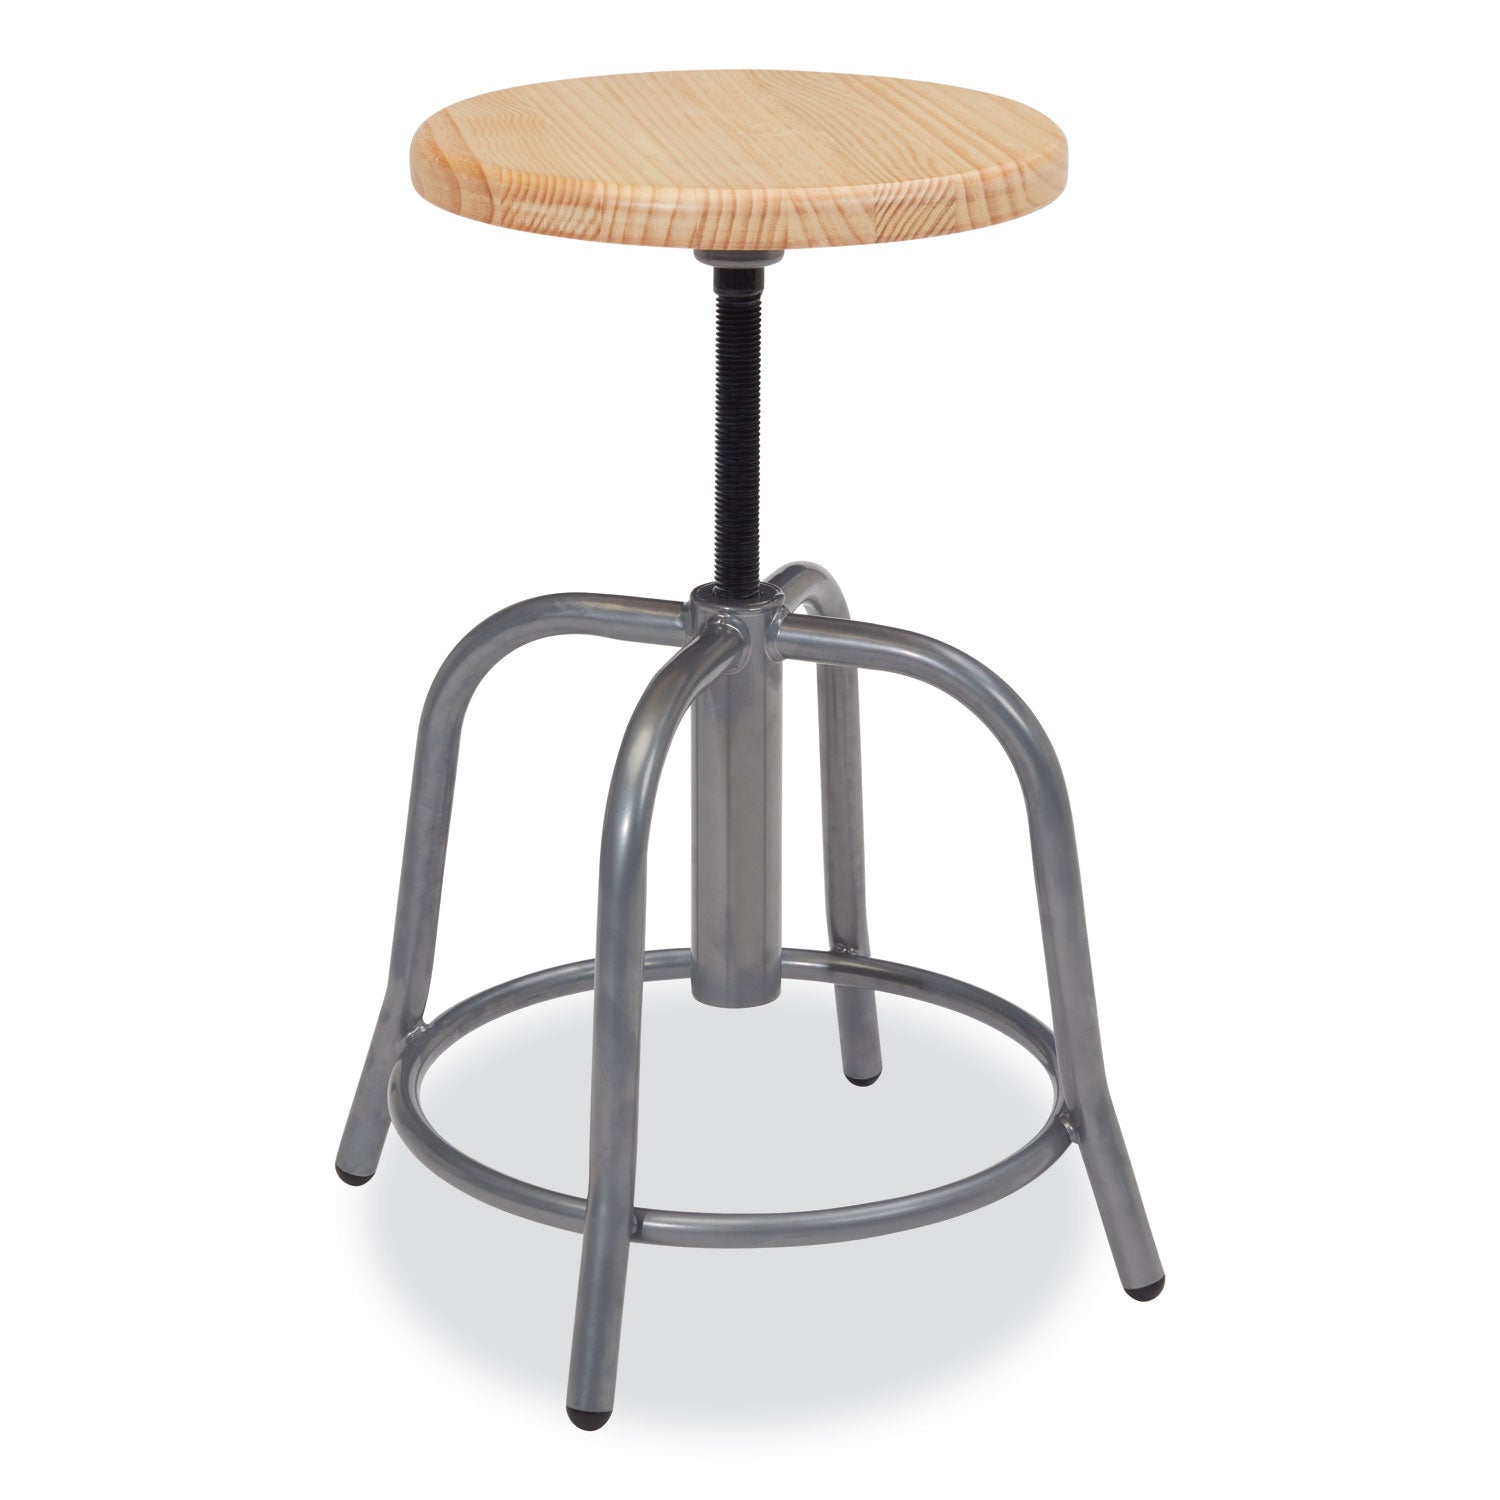 6800-series-height-adj-wood-seat-swivel-stool-supports-300-lb-19-25-seat-ht-maple-seat-gray-base-ships-in-1-3-bus-days_nps6800w02 - 2